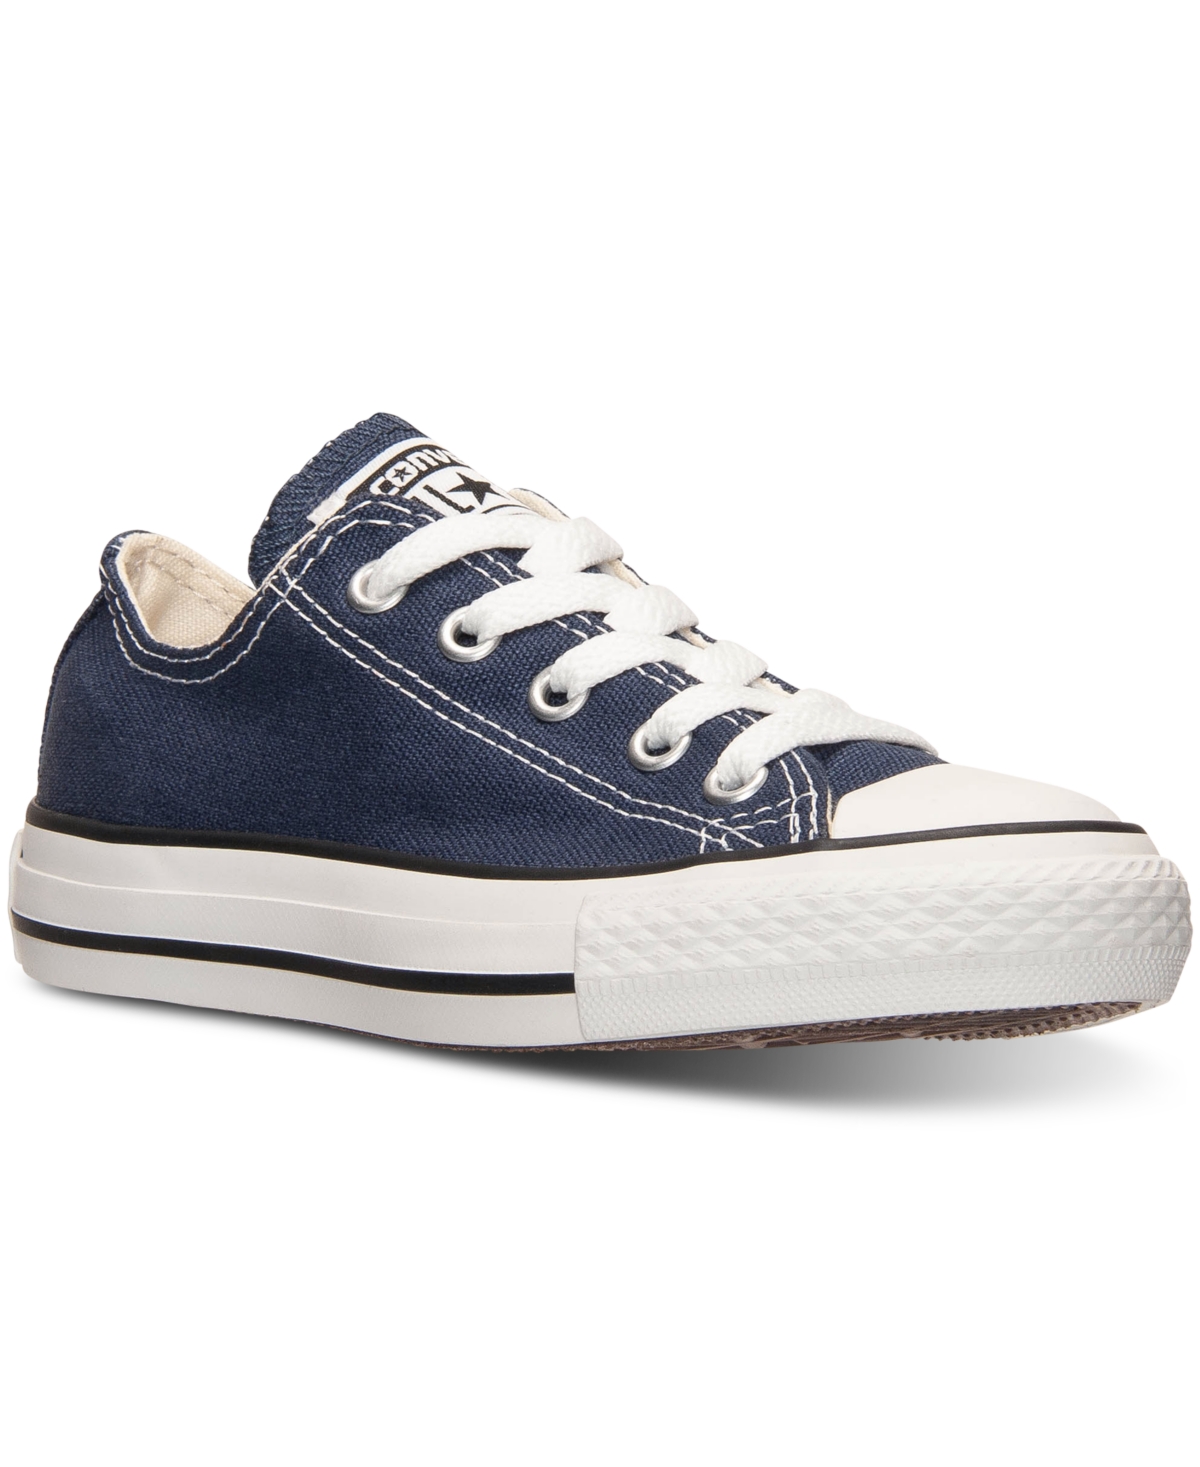 UPC 022866377546 product image for Converse Little Kids' Chuck Taylor Original Sneakers from Finish Line | upcitemdb.com